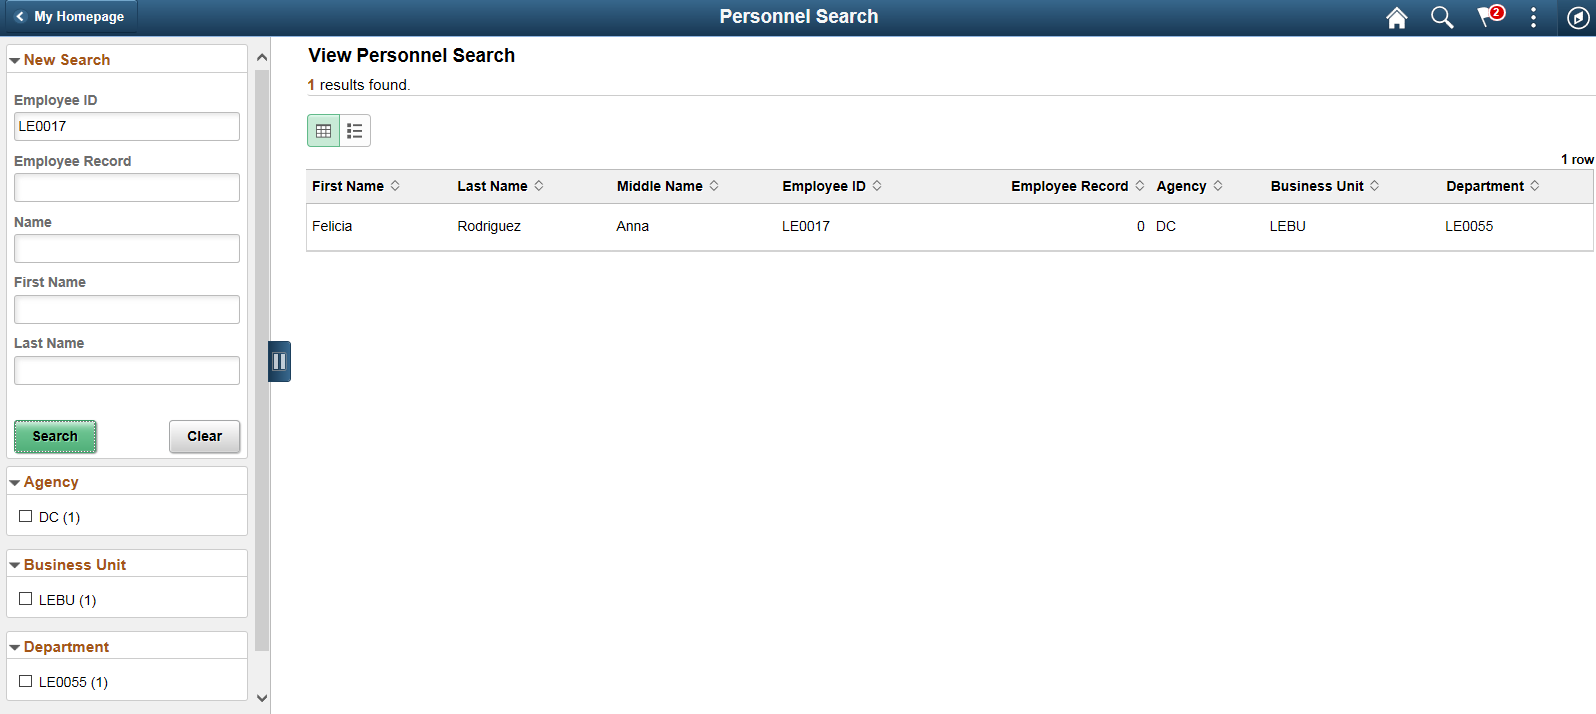 Personnel Search page